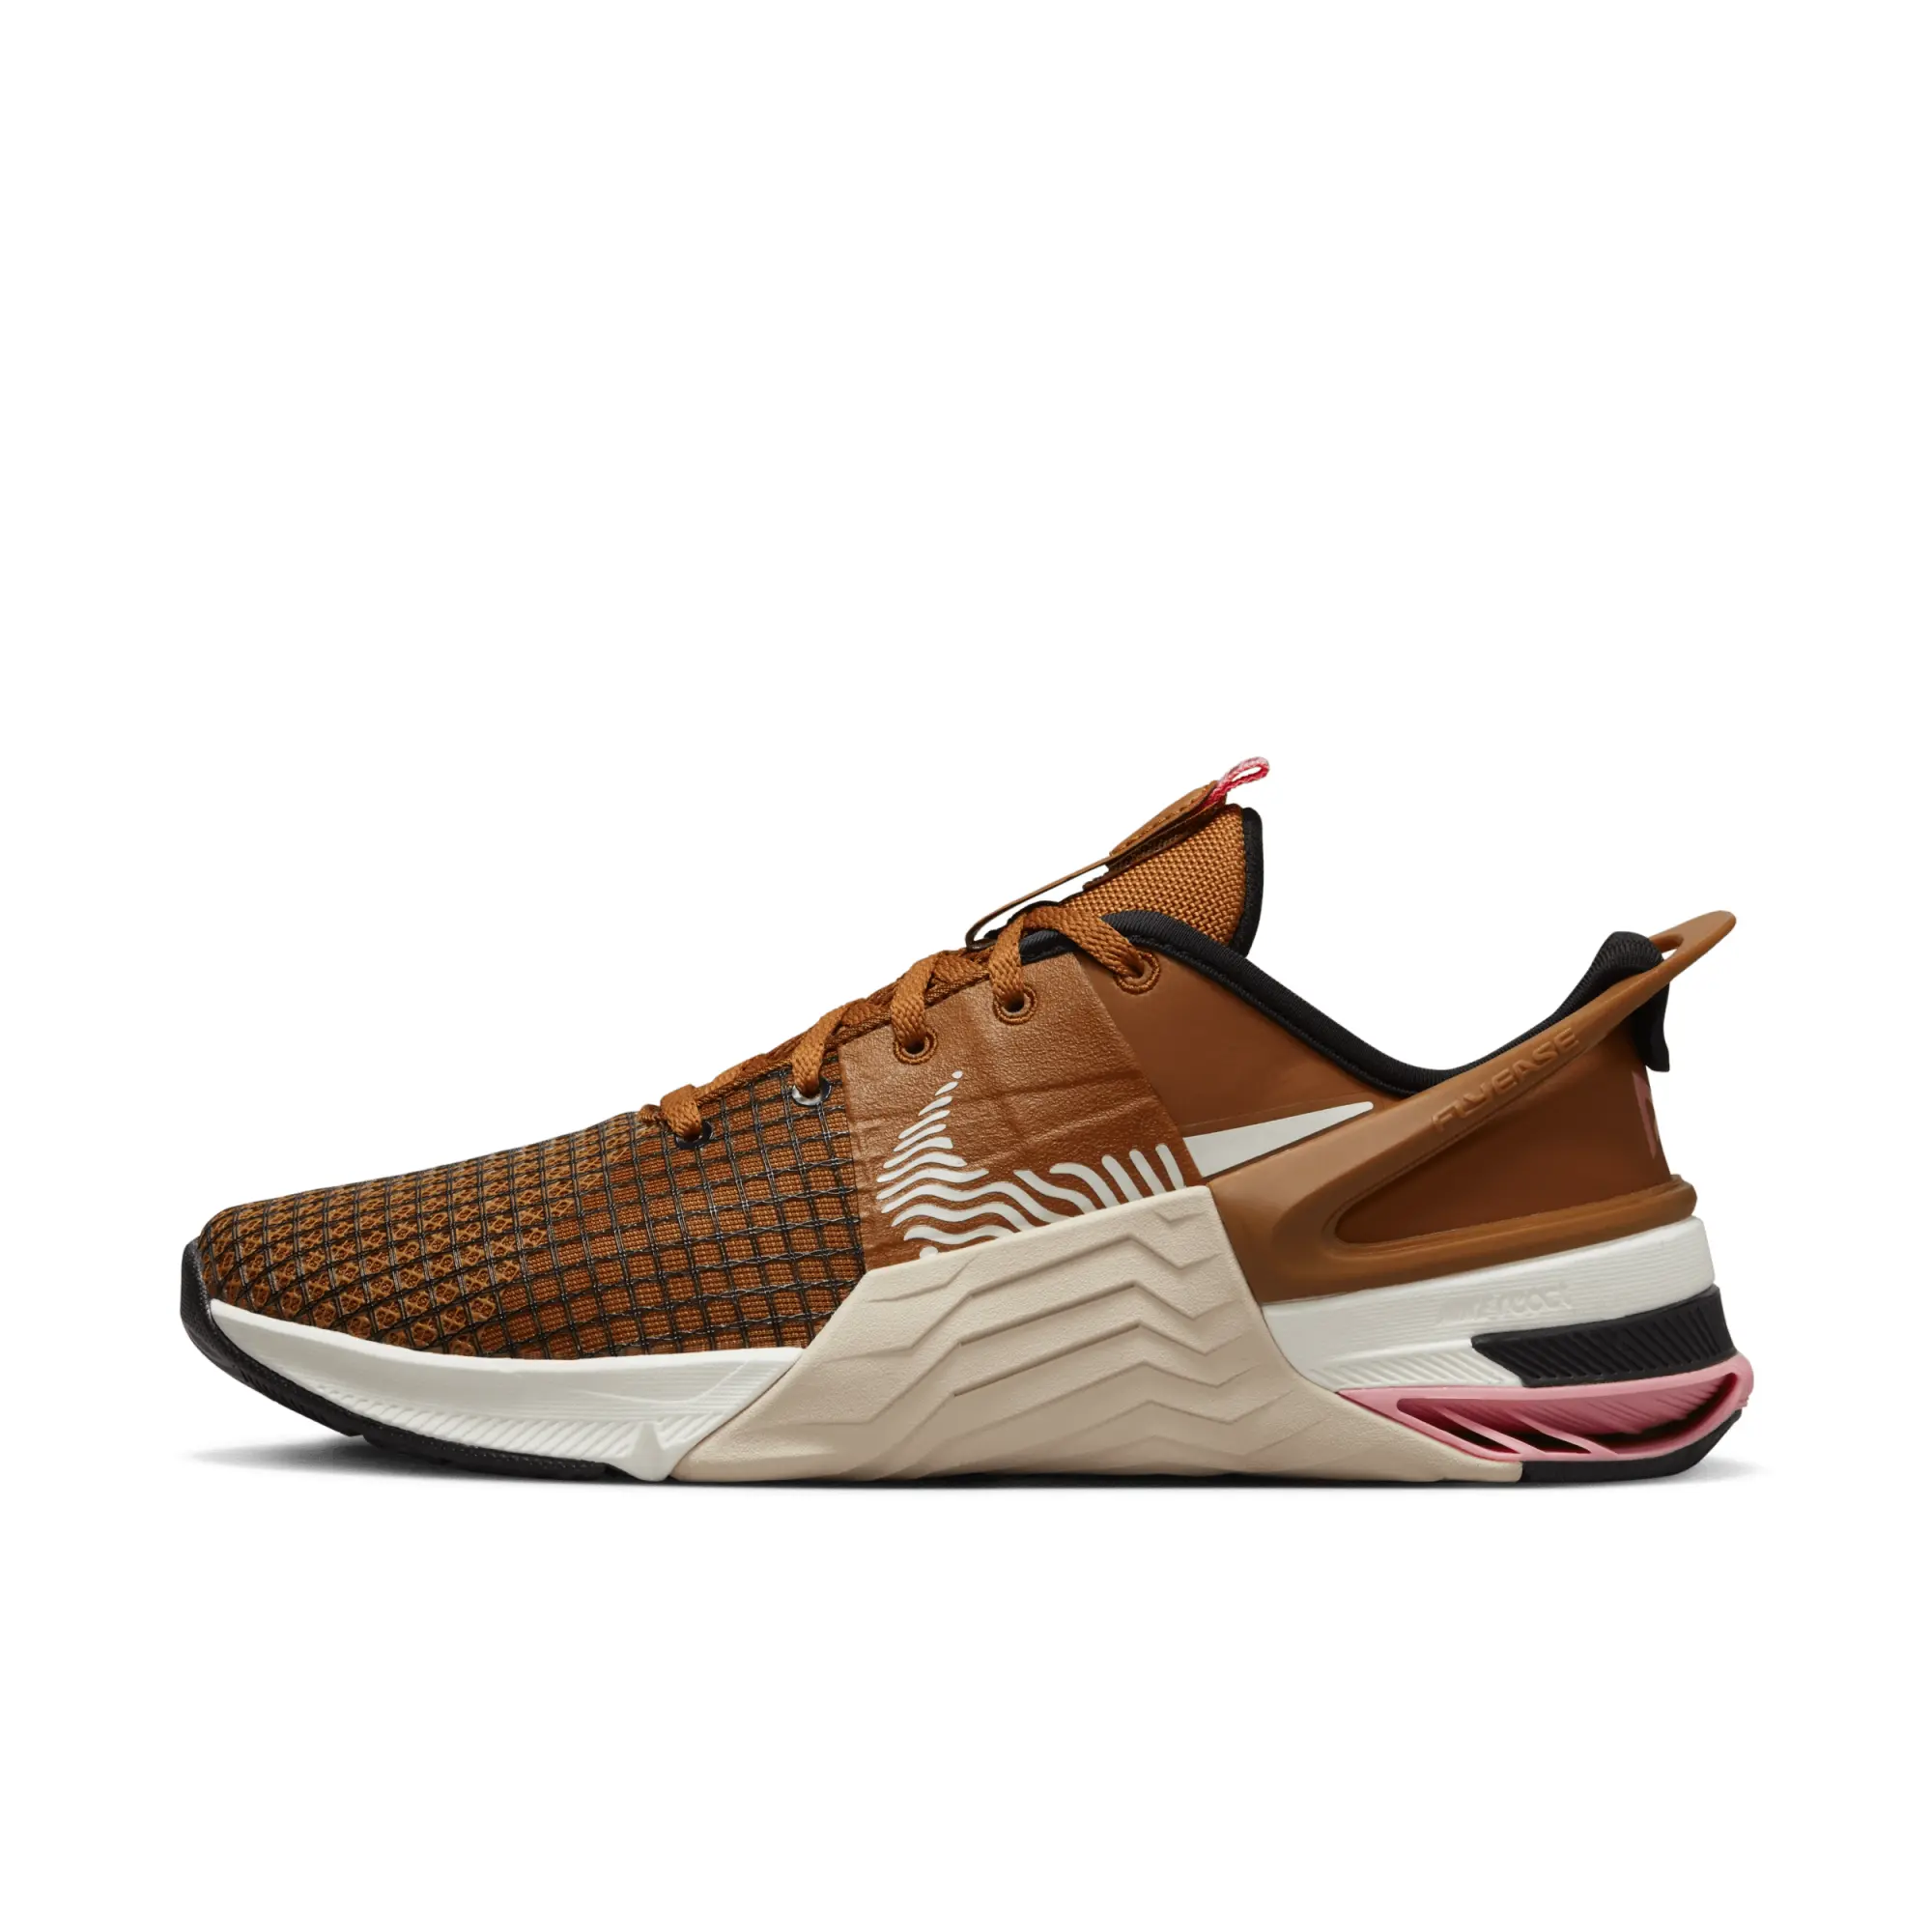 Nike Training Metcon Flyease 8 Trainer In Brown